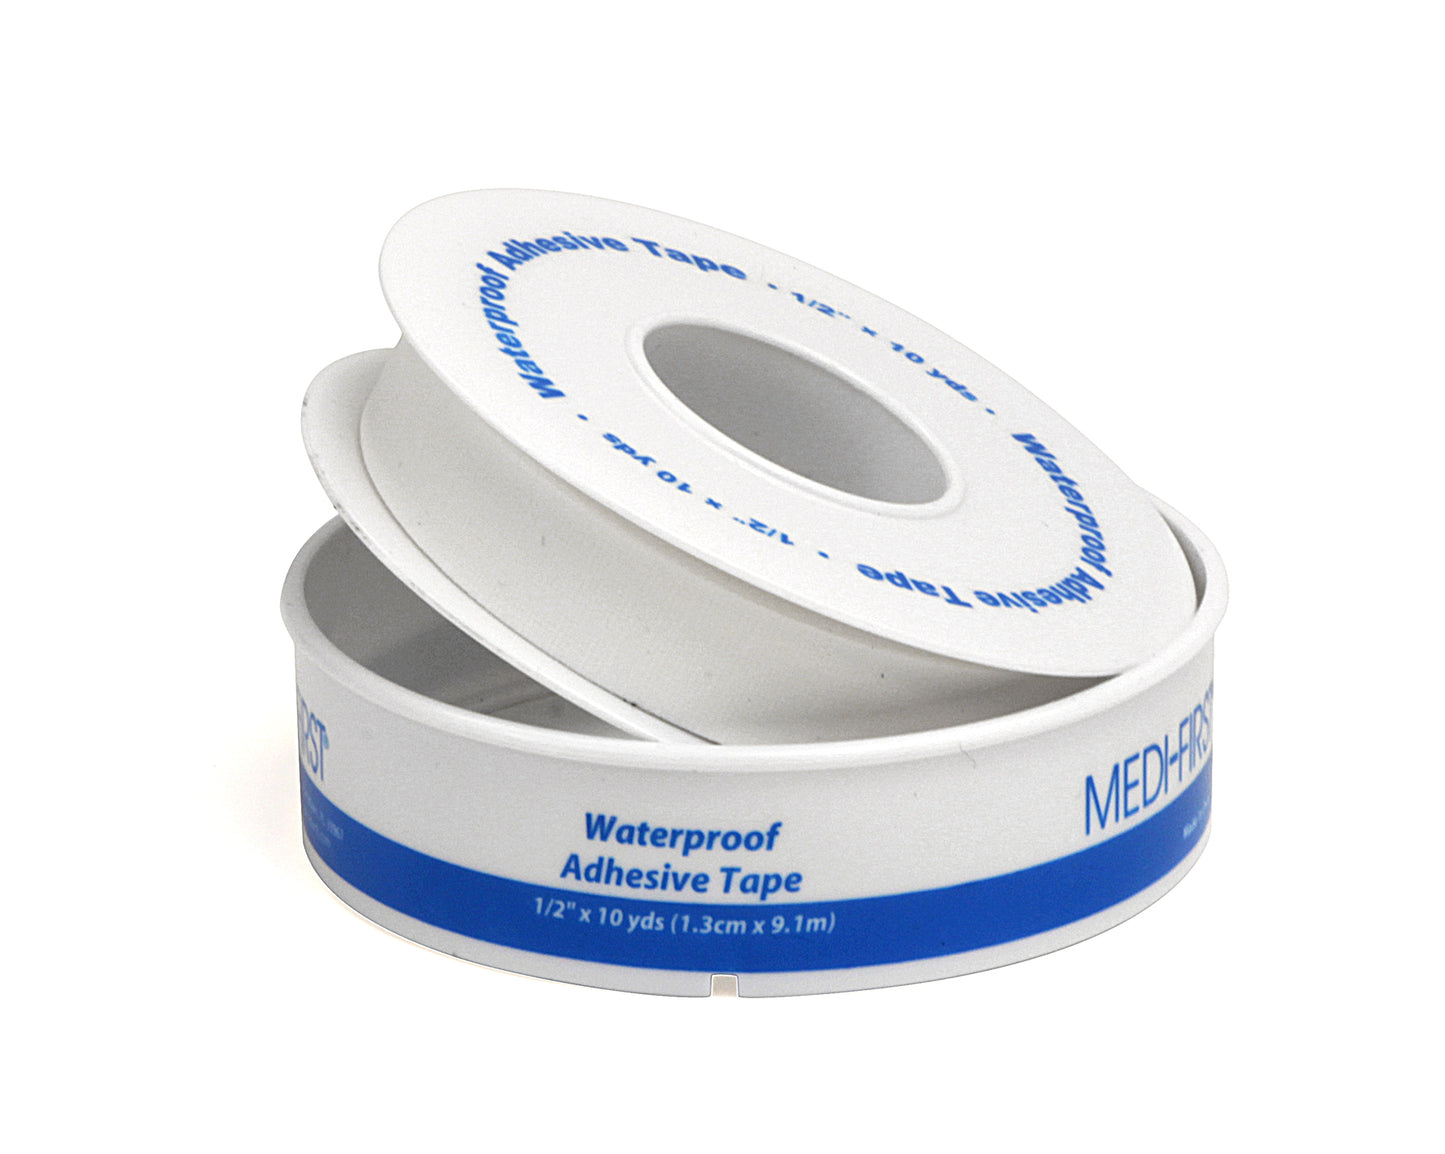 Waterproof Adhesive Tape 10yd (Available 1/2" or 1" wide)